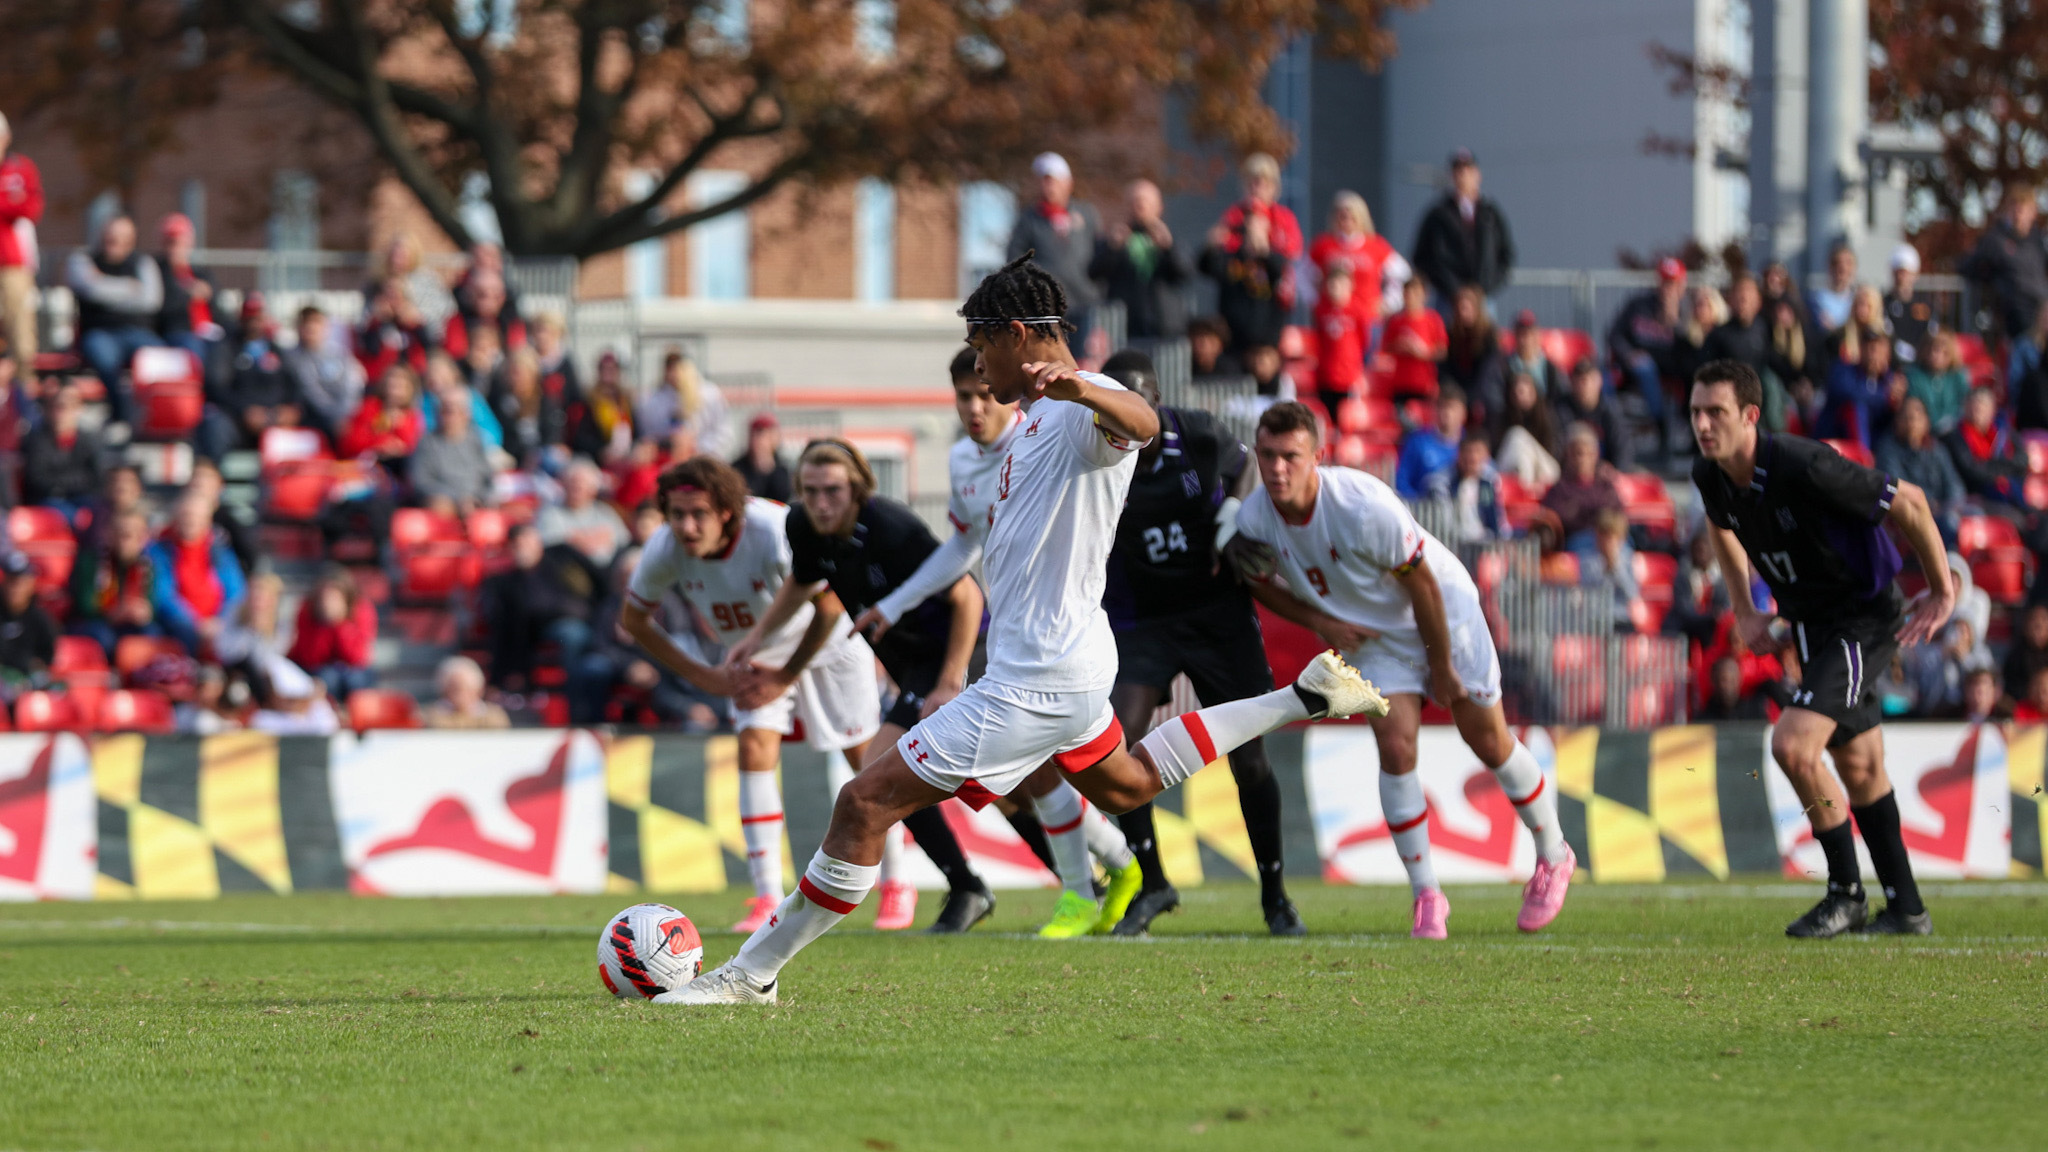 Another missed penalty kick dooms Maryland men's soccer in 1-0 loss to  Wisconsin - Testudo Times